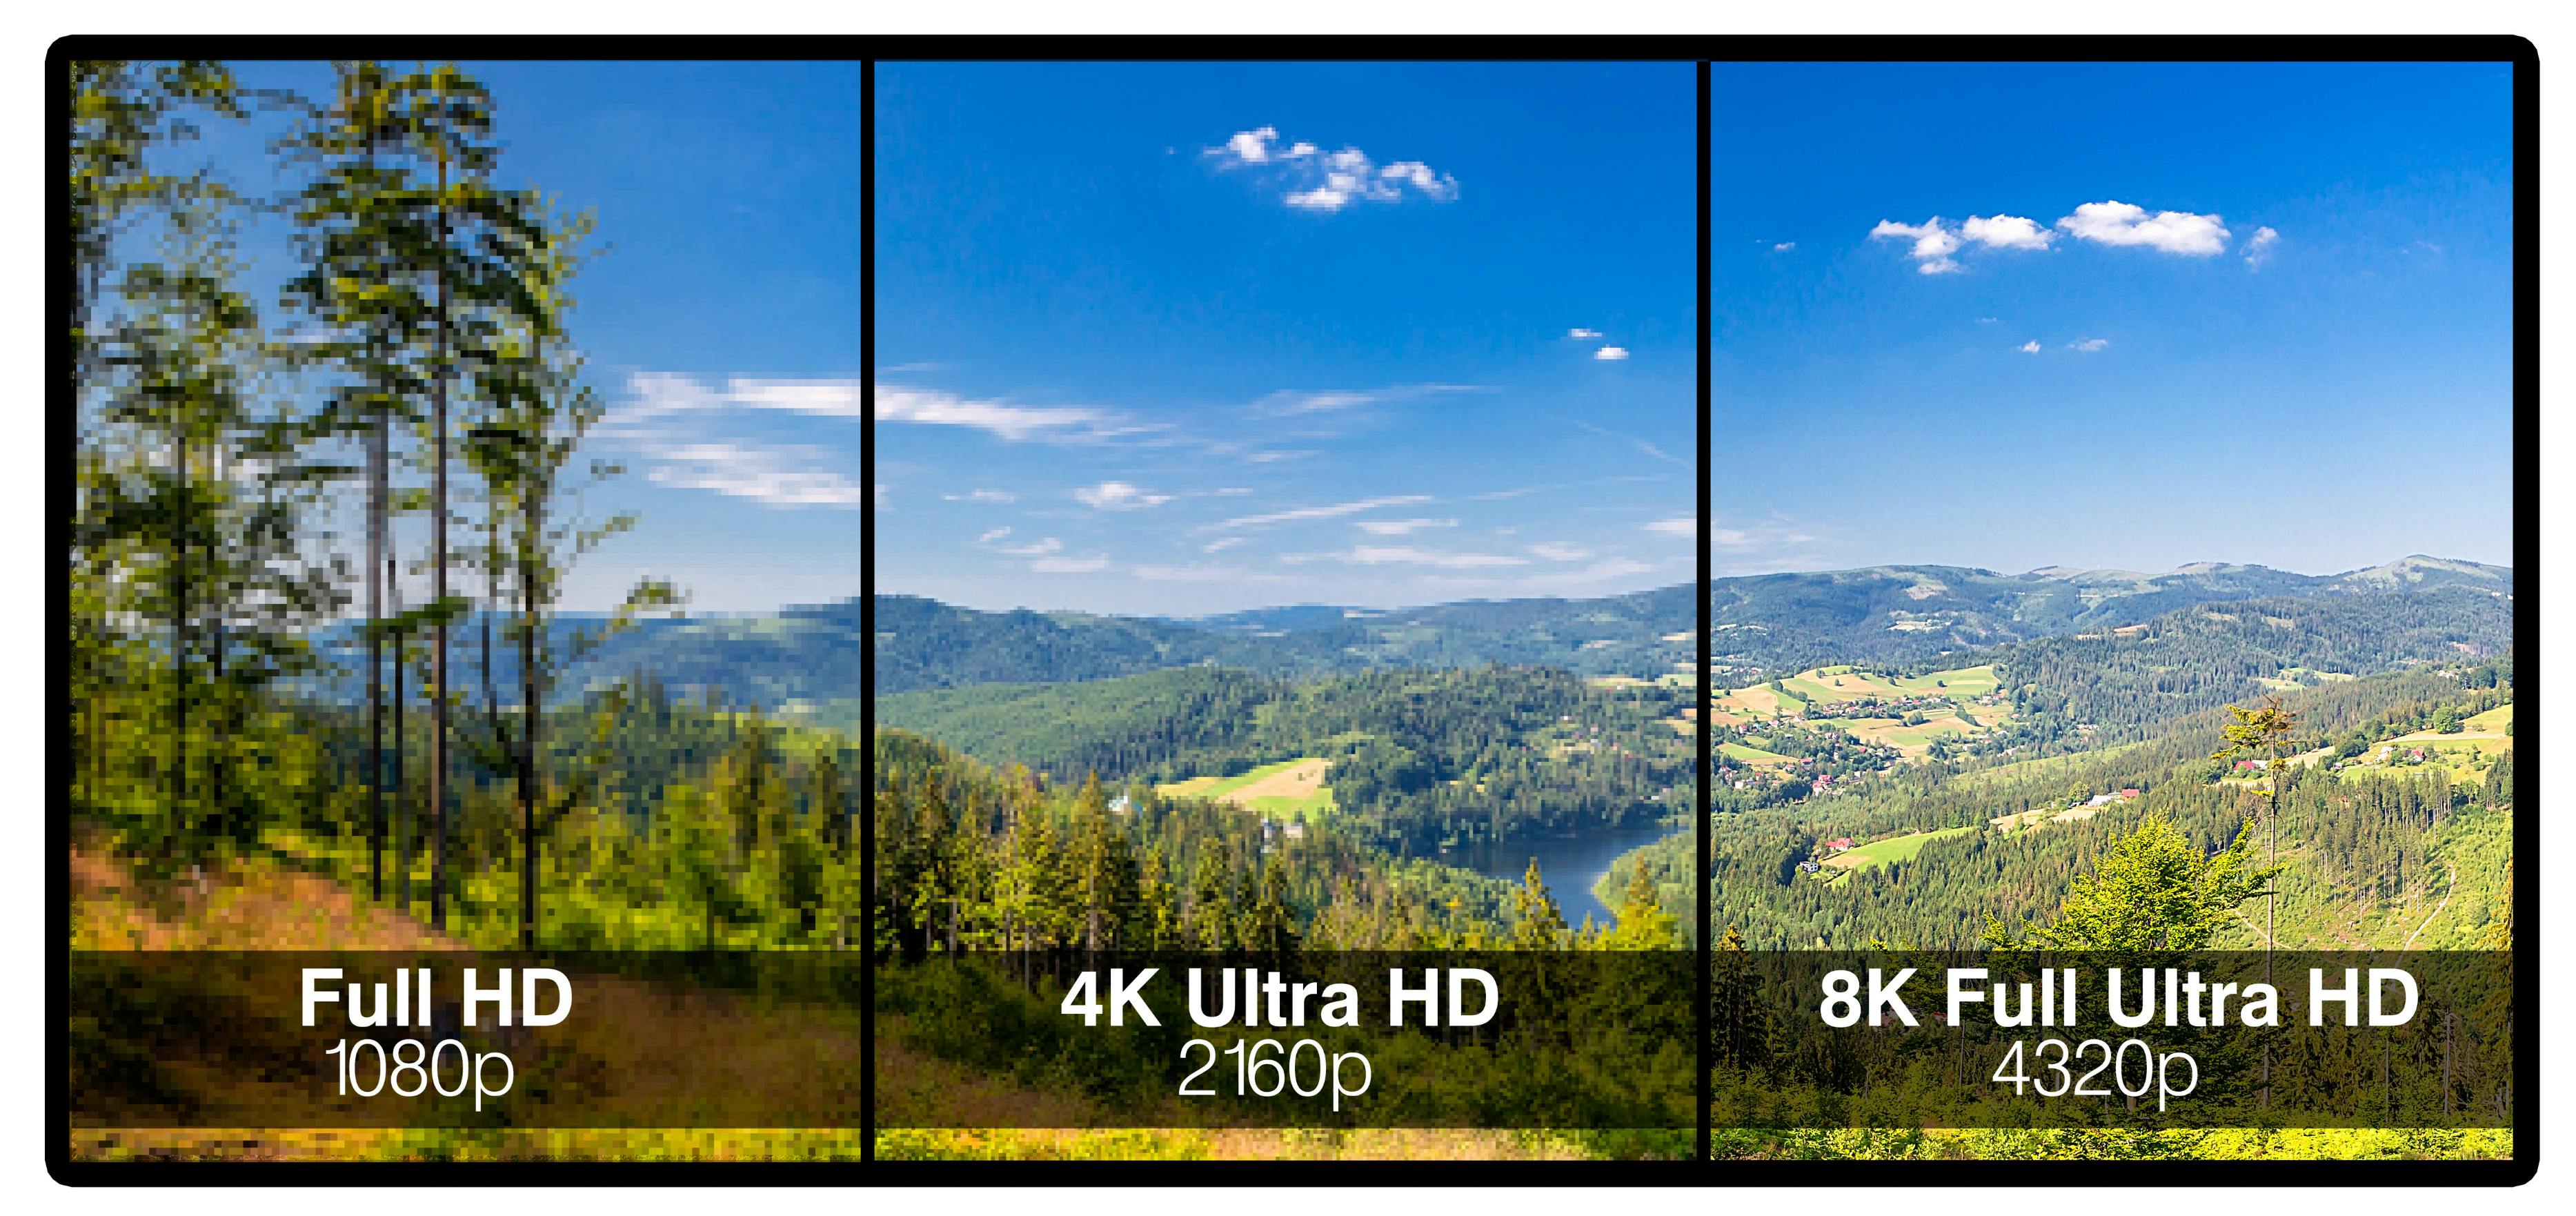 What is video resolution?